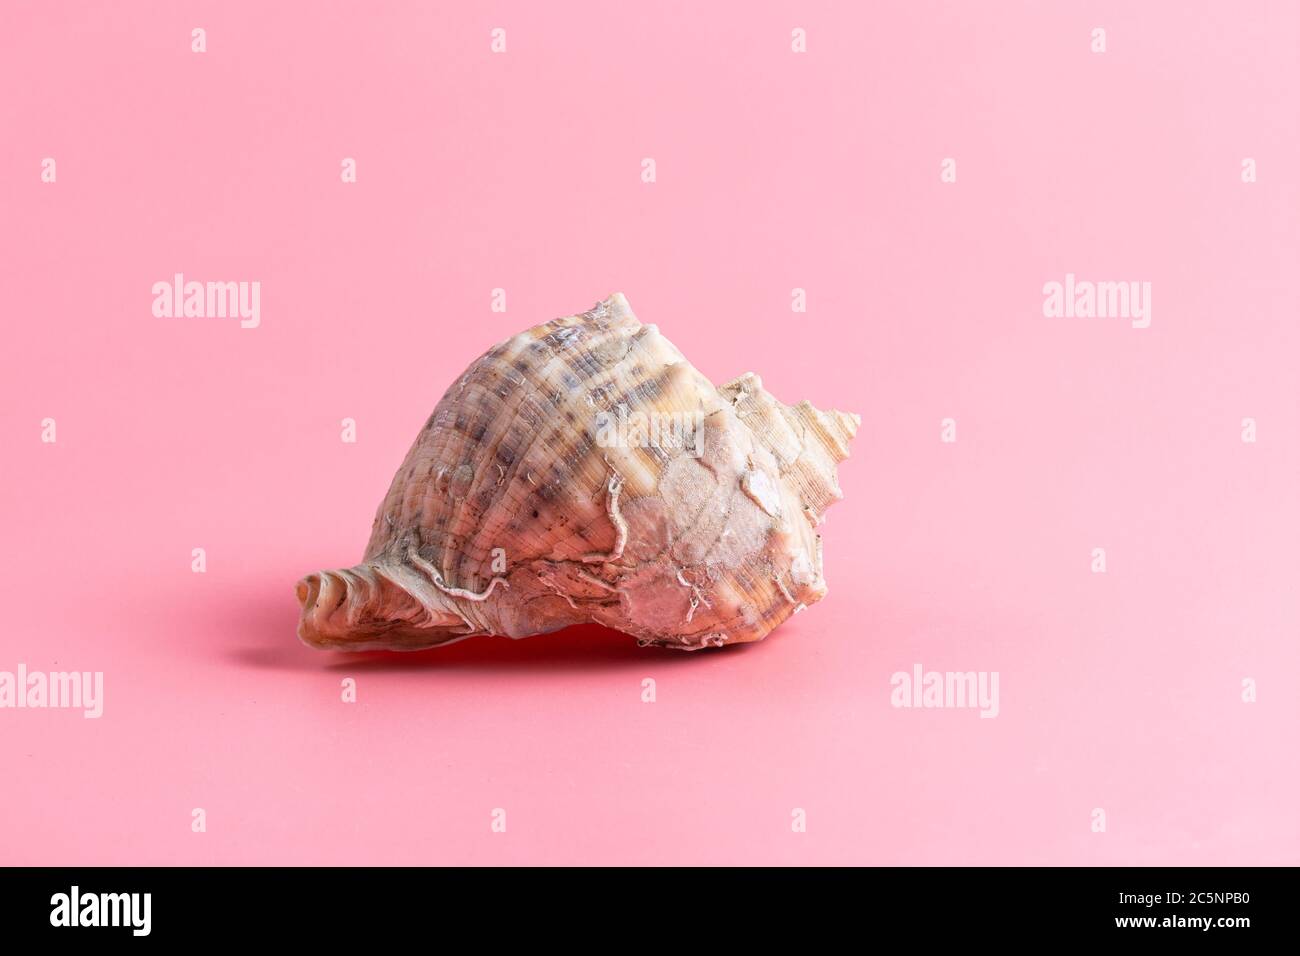 Spiral shell closeup on pink background Stock Photo